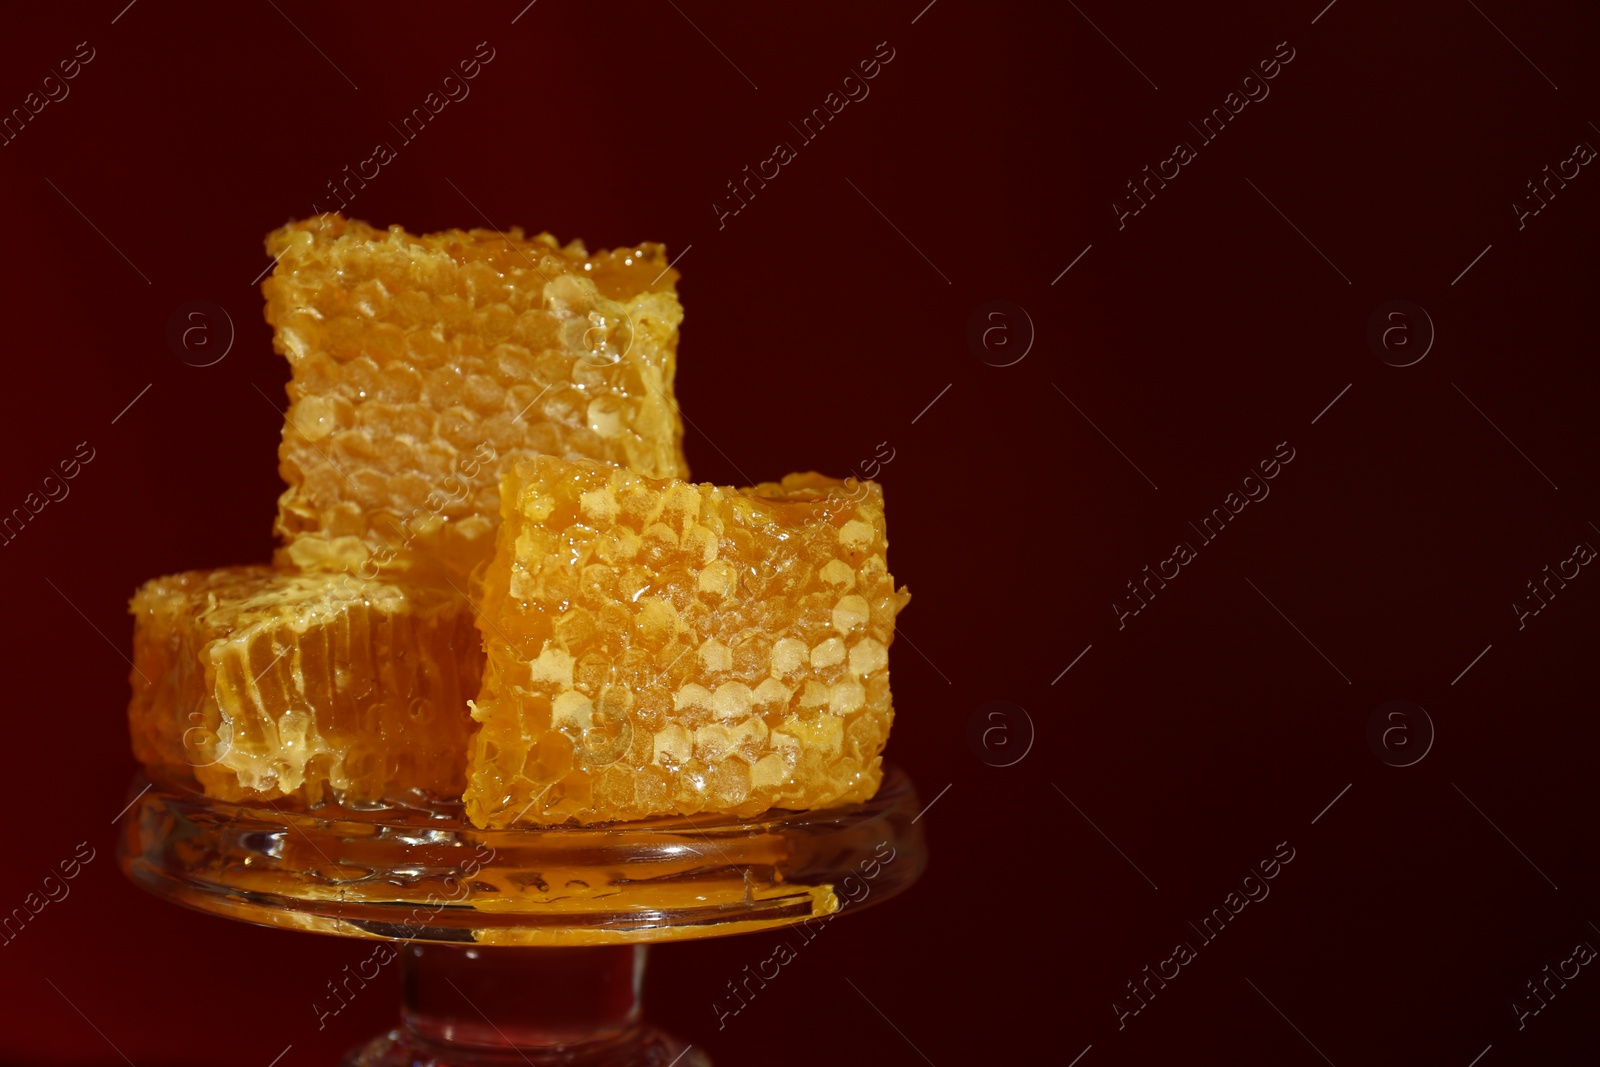 Photo of Natural honeycombs on glass stand against burgundy background, space for text